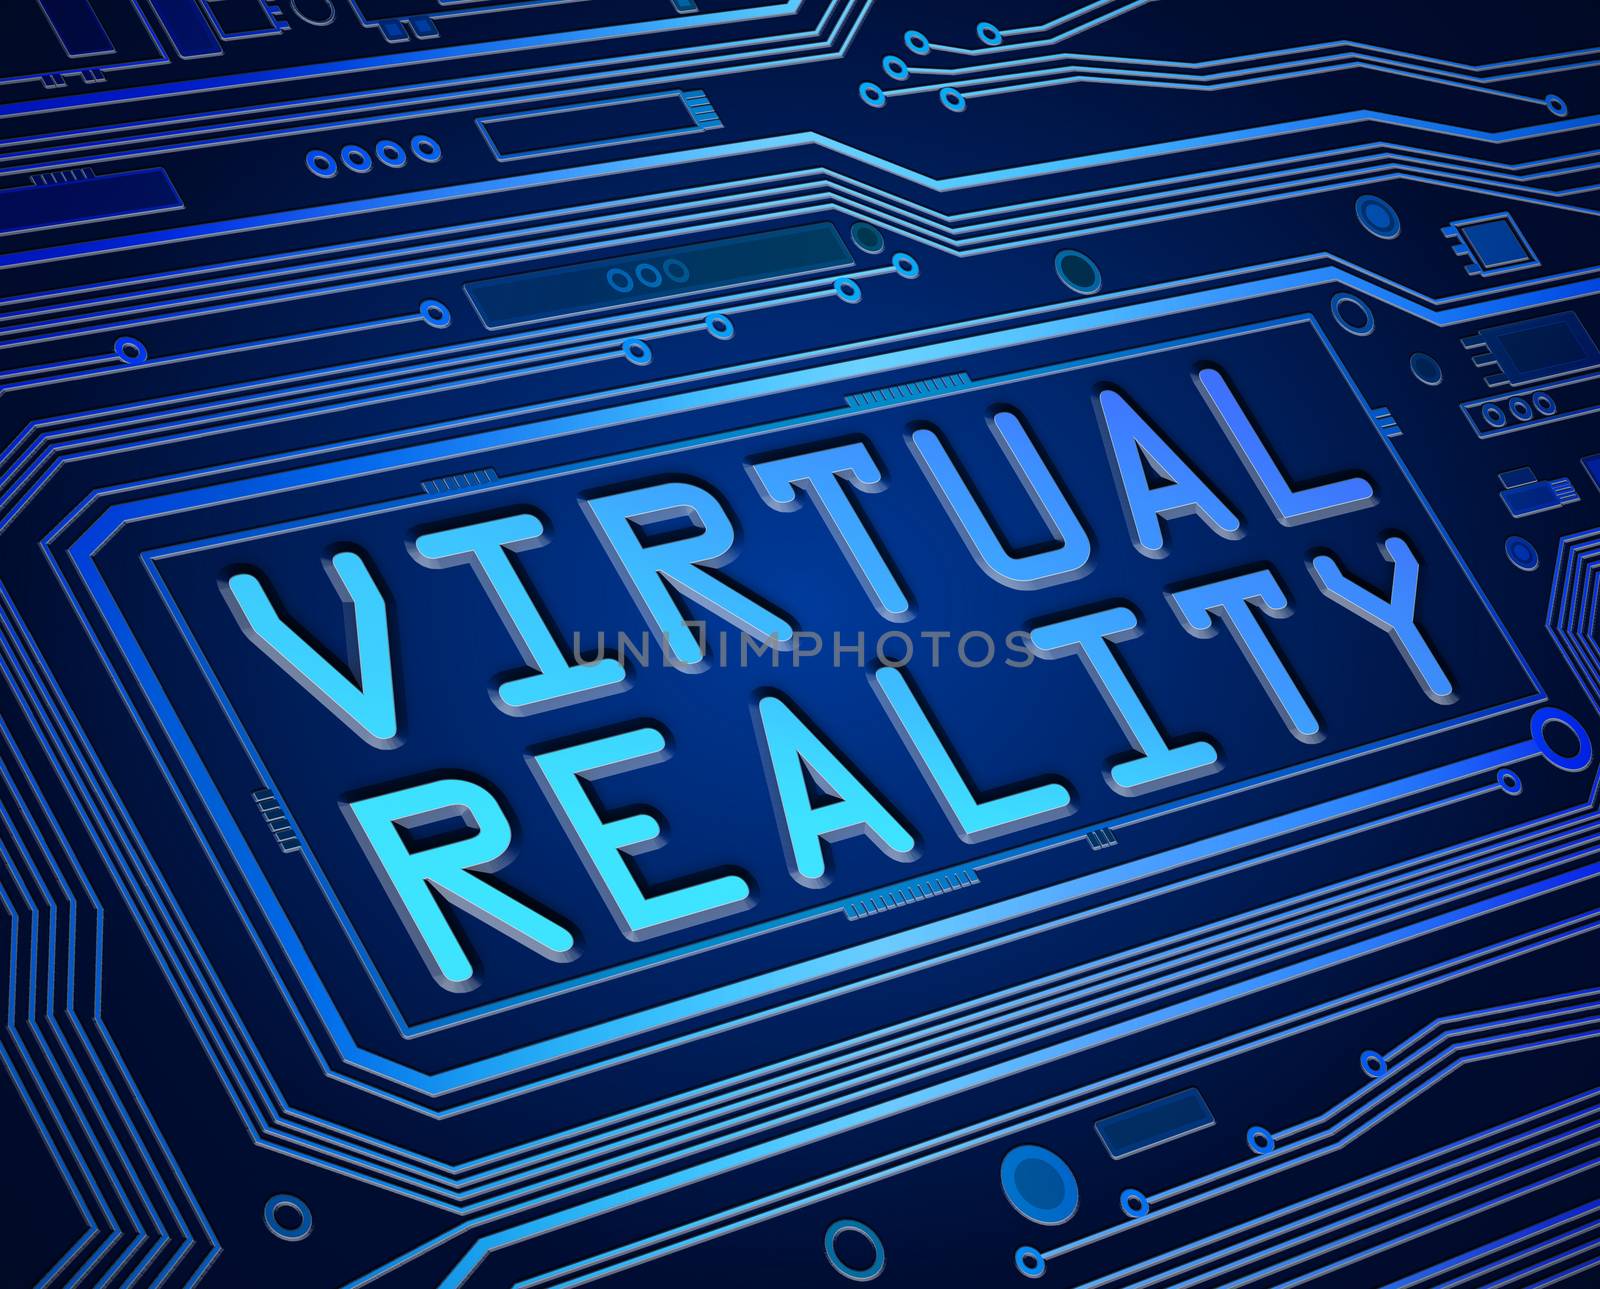 Abstract style illustration depicting printed circuit board components with a virtual reality concept.